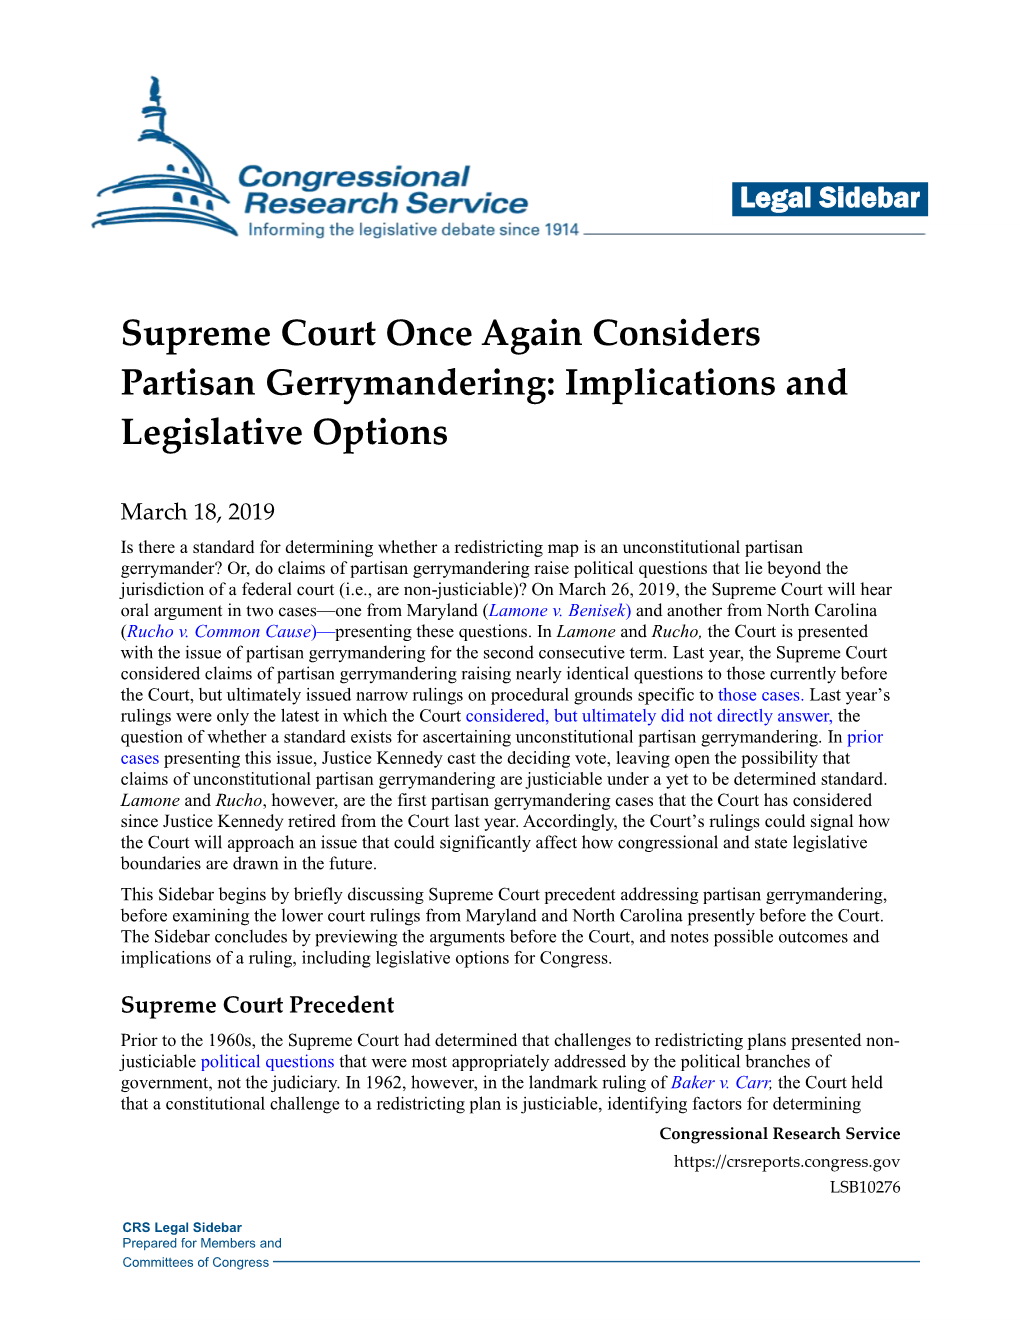 Supreme Court Once Again Considers Partisan Gerrymandering: Implications and Legislative Options